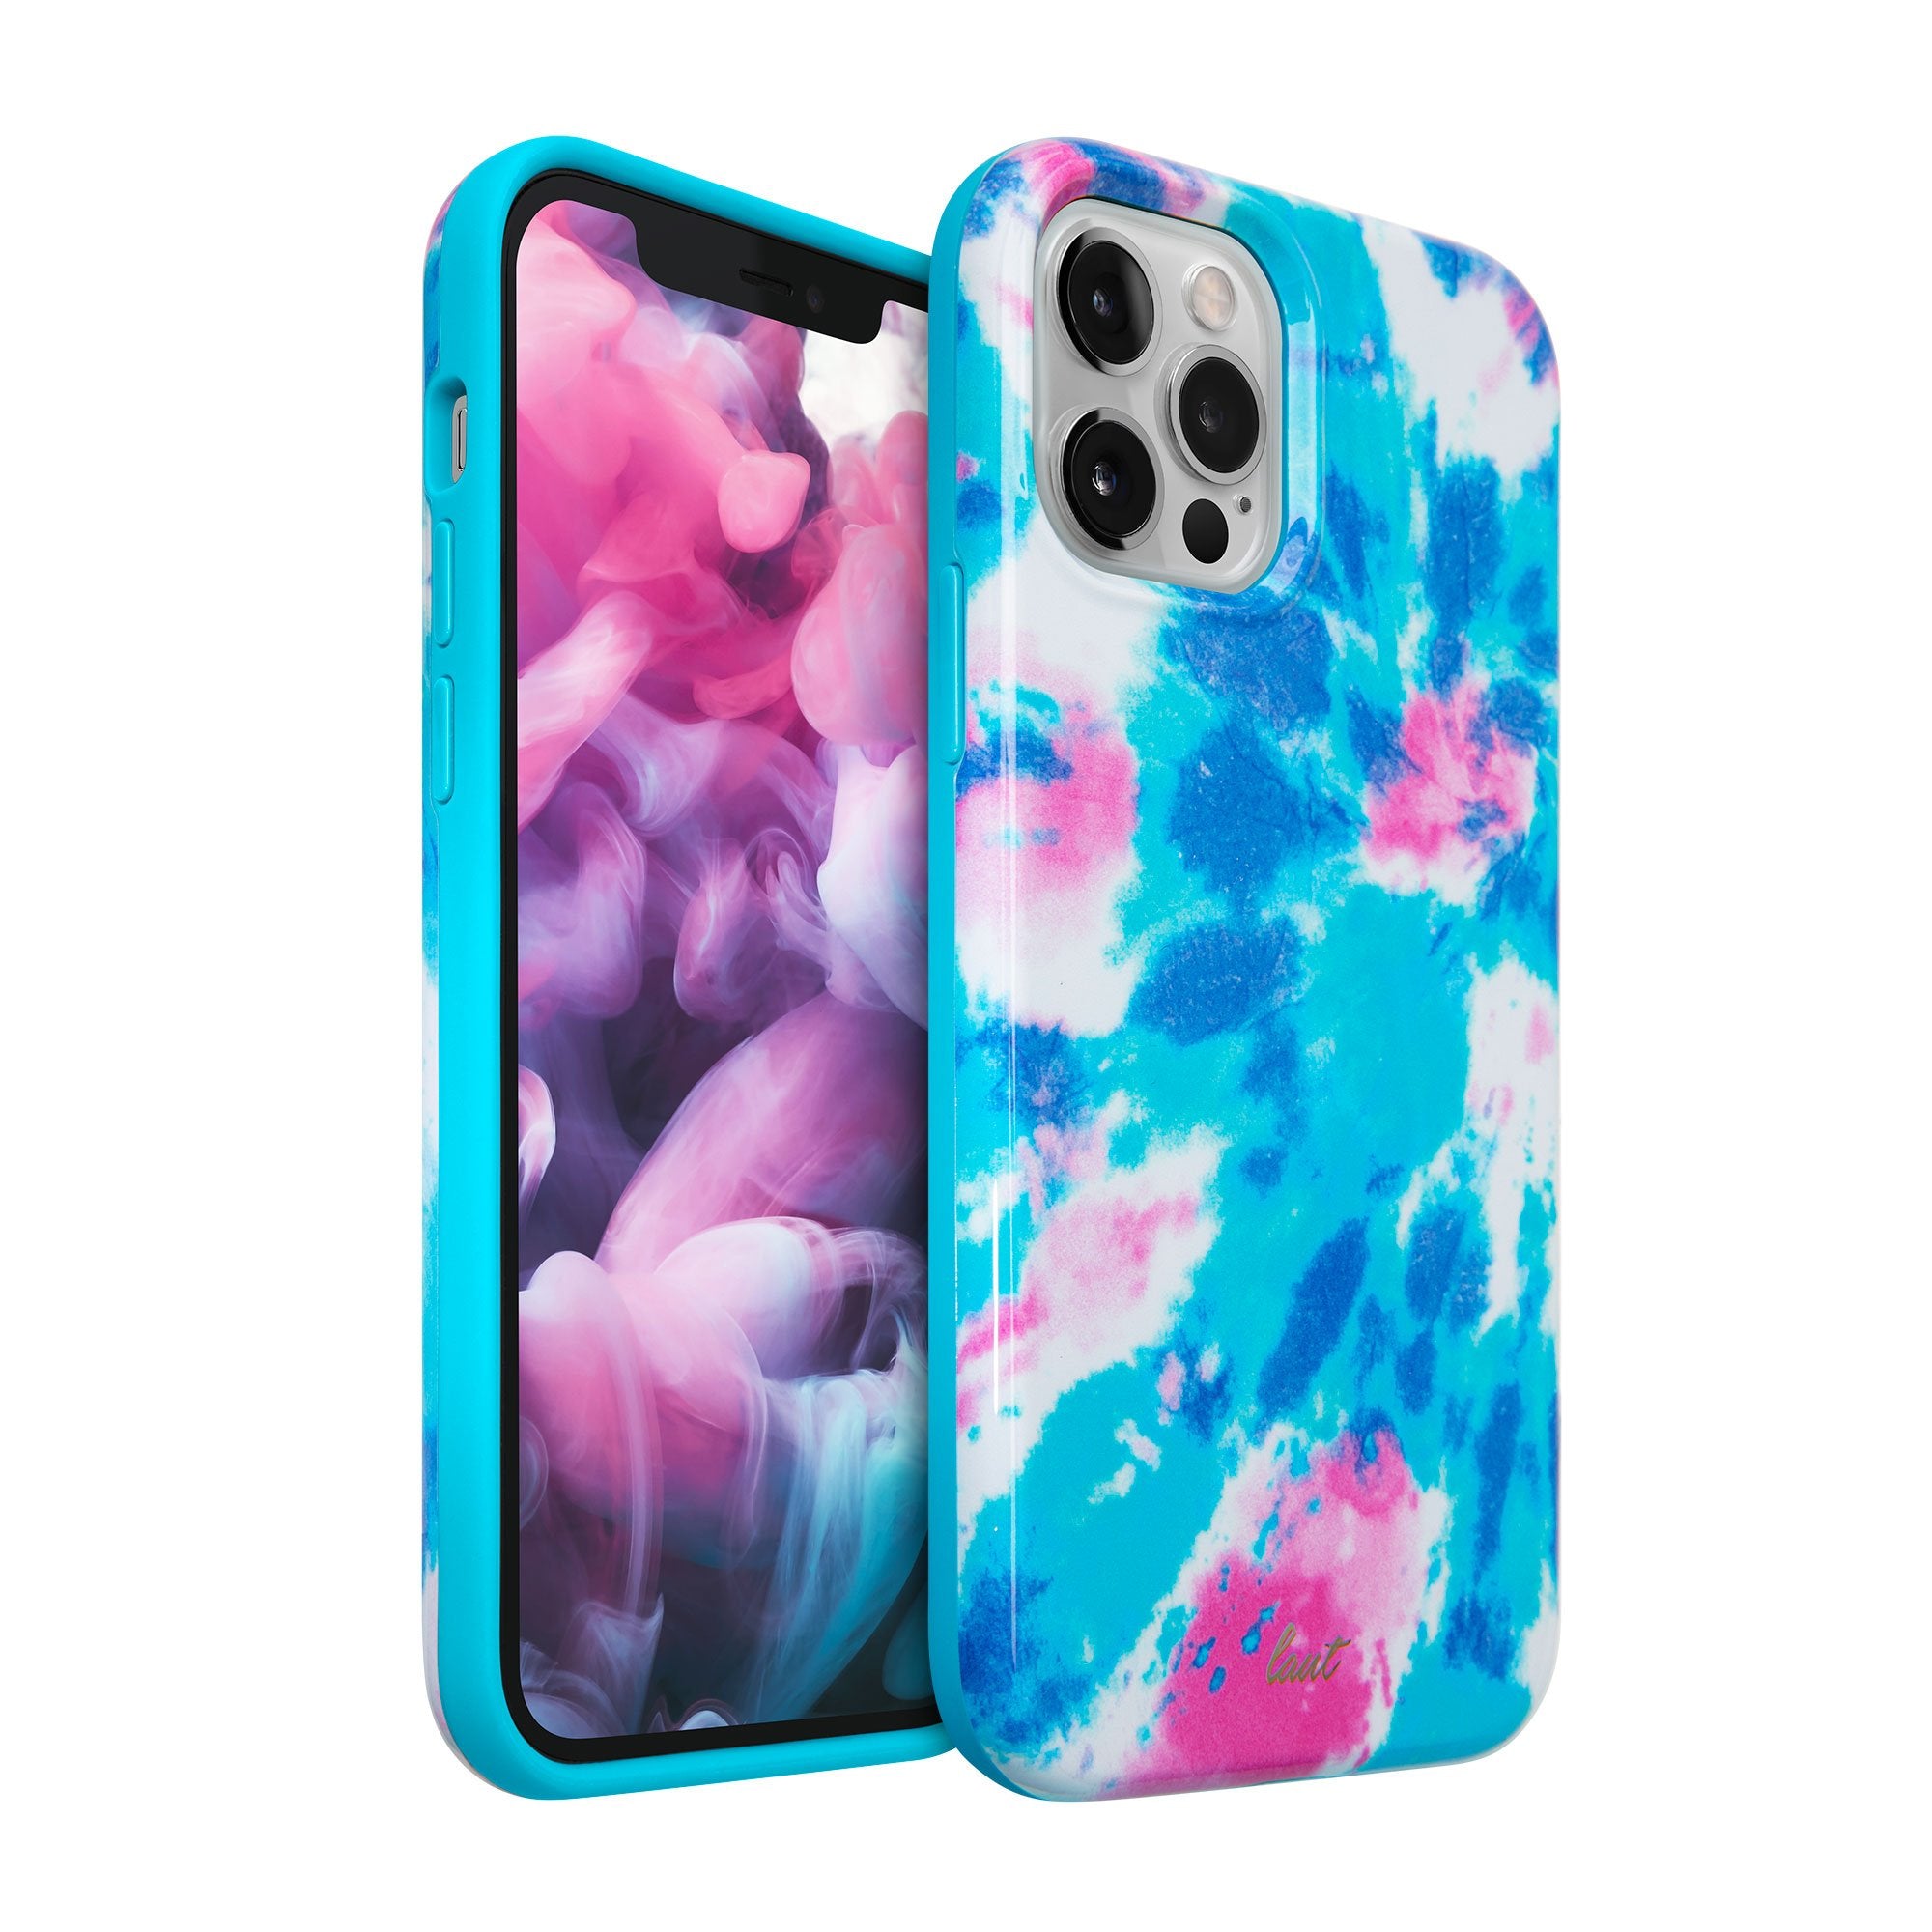 HUEX TIE DYE case for iPhone 12 series